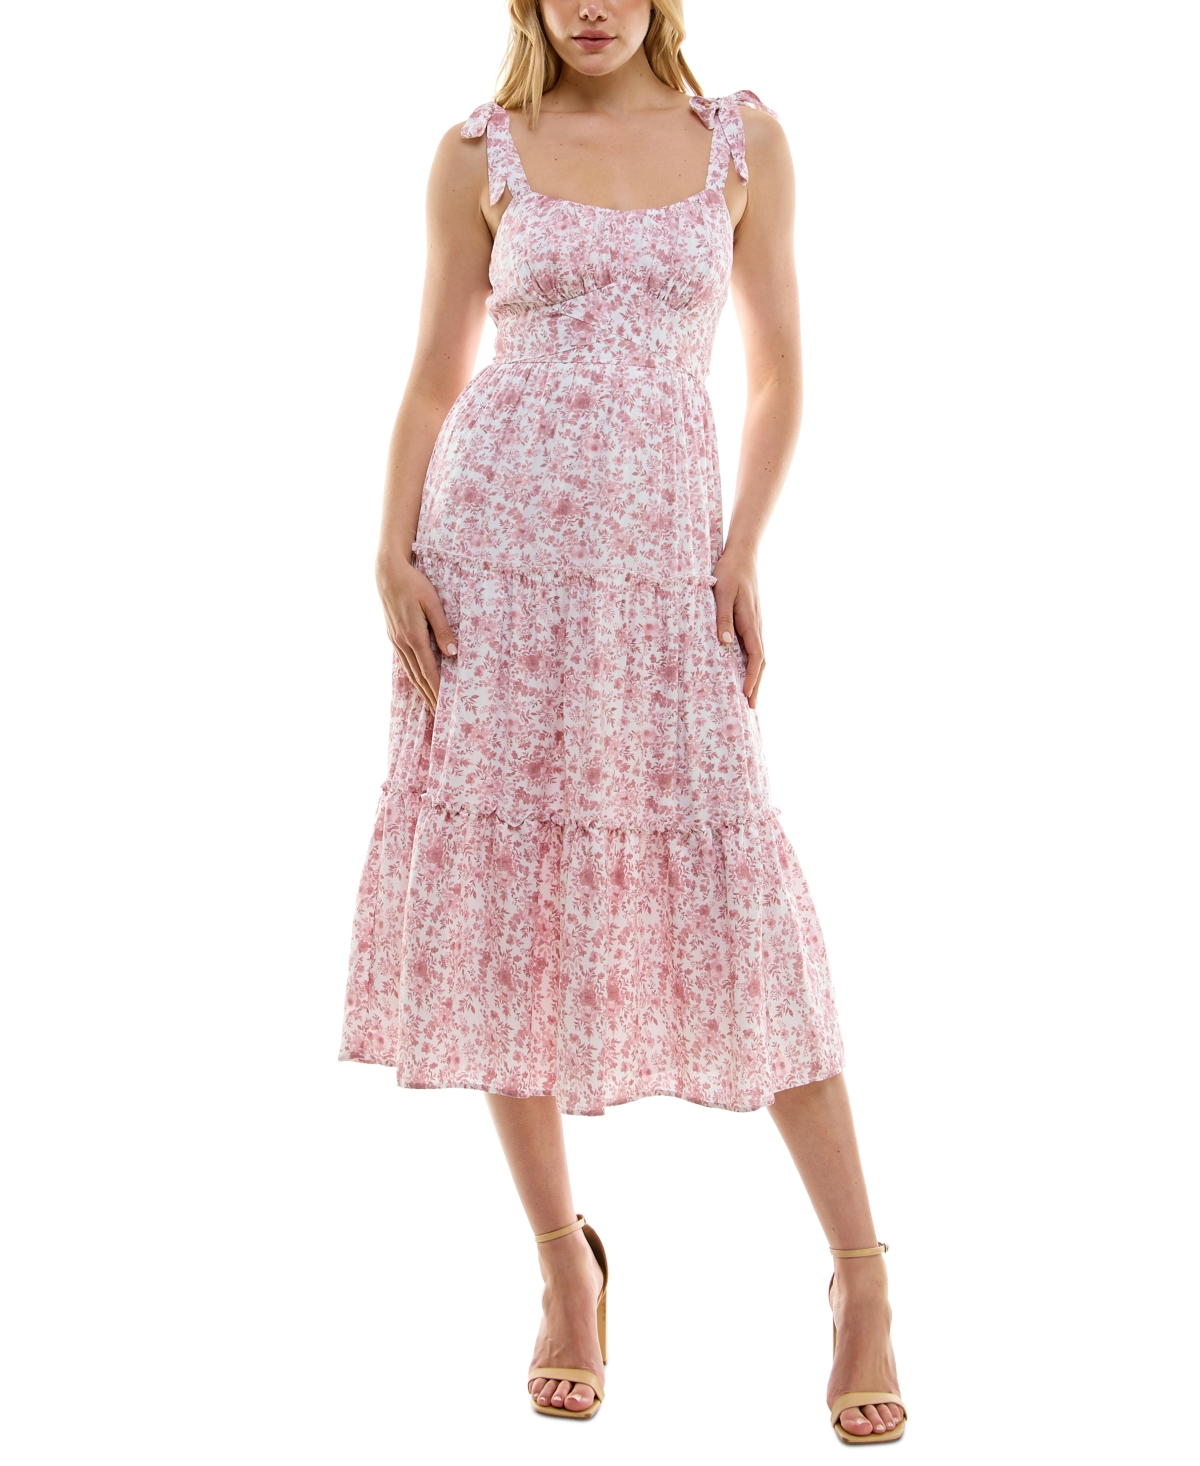 Juniors' Tie-Strap Tiered Fit & Flare Midi Dress - White Pink Floral